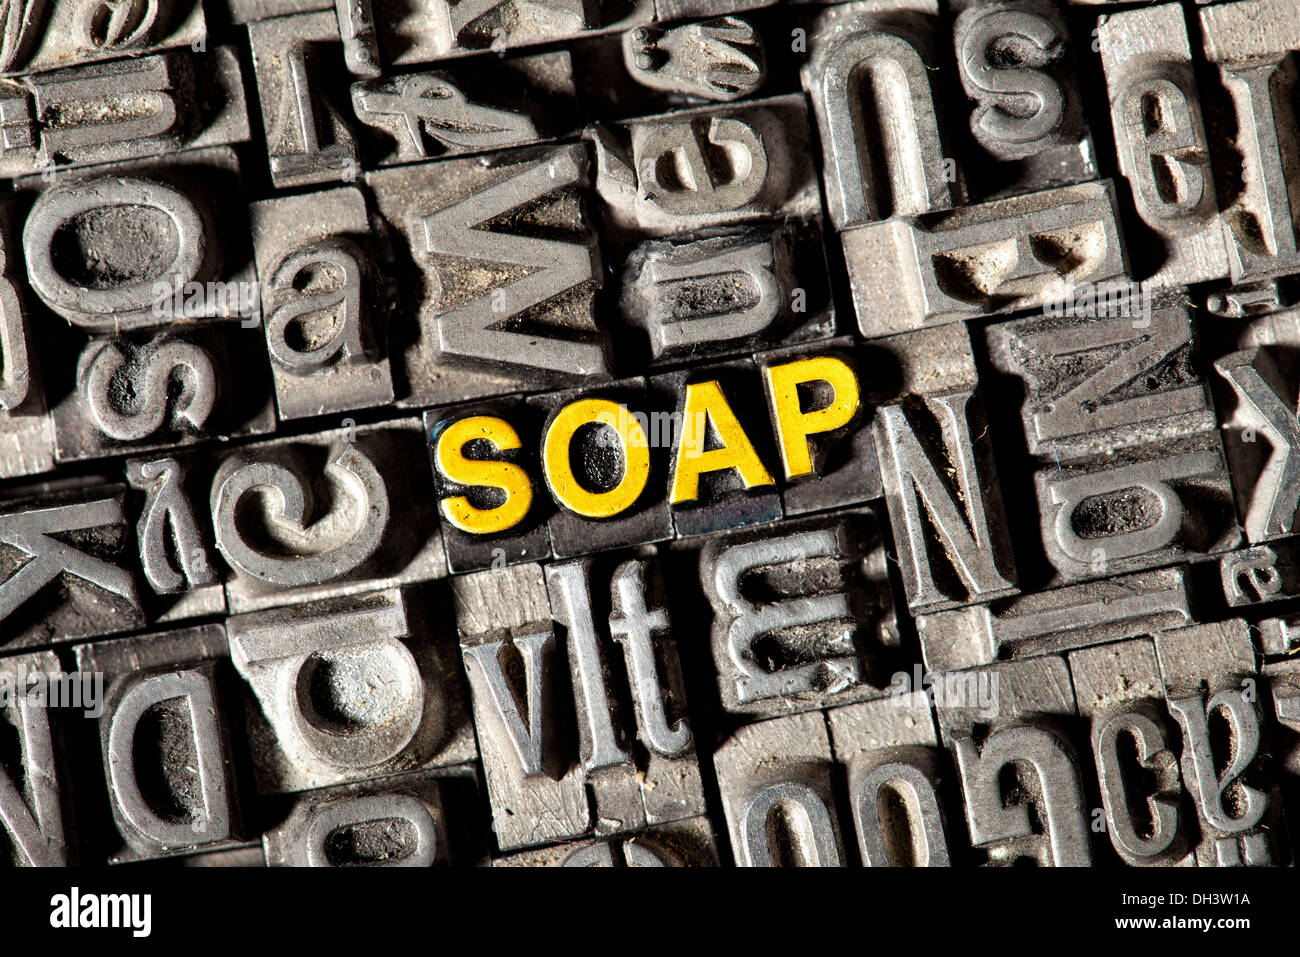 Old lead letters forming the word 'SOAP' Stock Photo